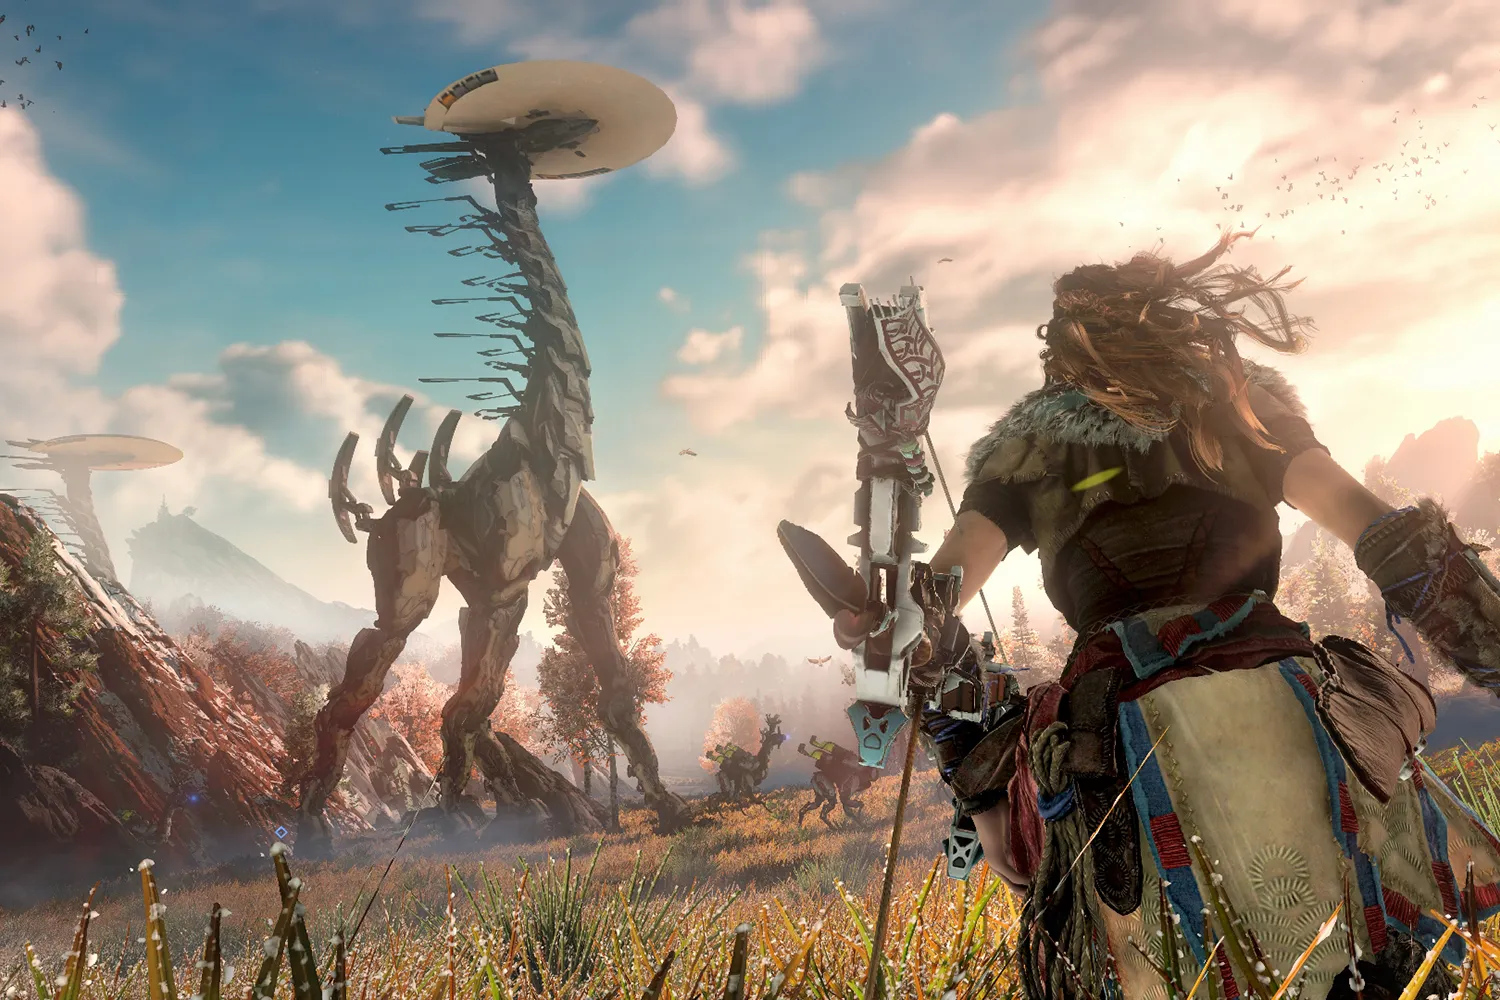 The Week In Games: What's On The Horizon?